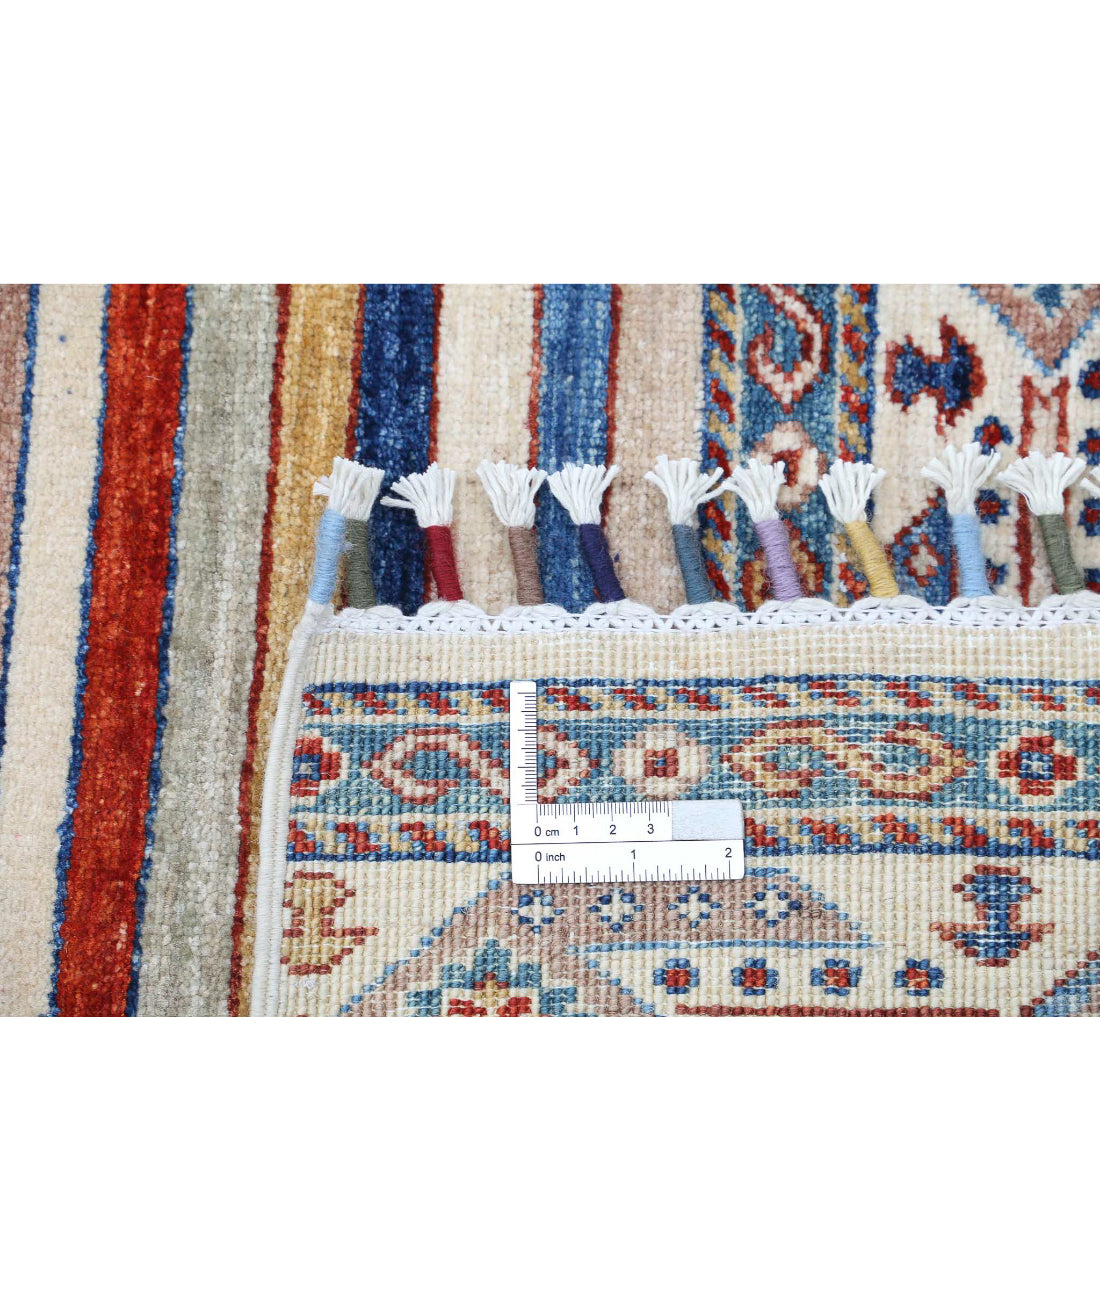 Hand Knotted Khurjeen Wool Rug - 4'10'' x 6'3'' 4'10'' x 6'3'' (145 X 188) / Multi / Multi